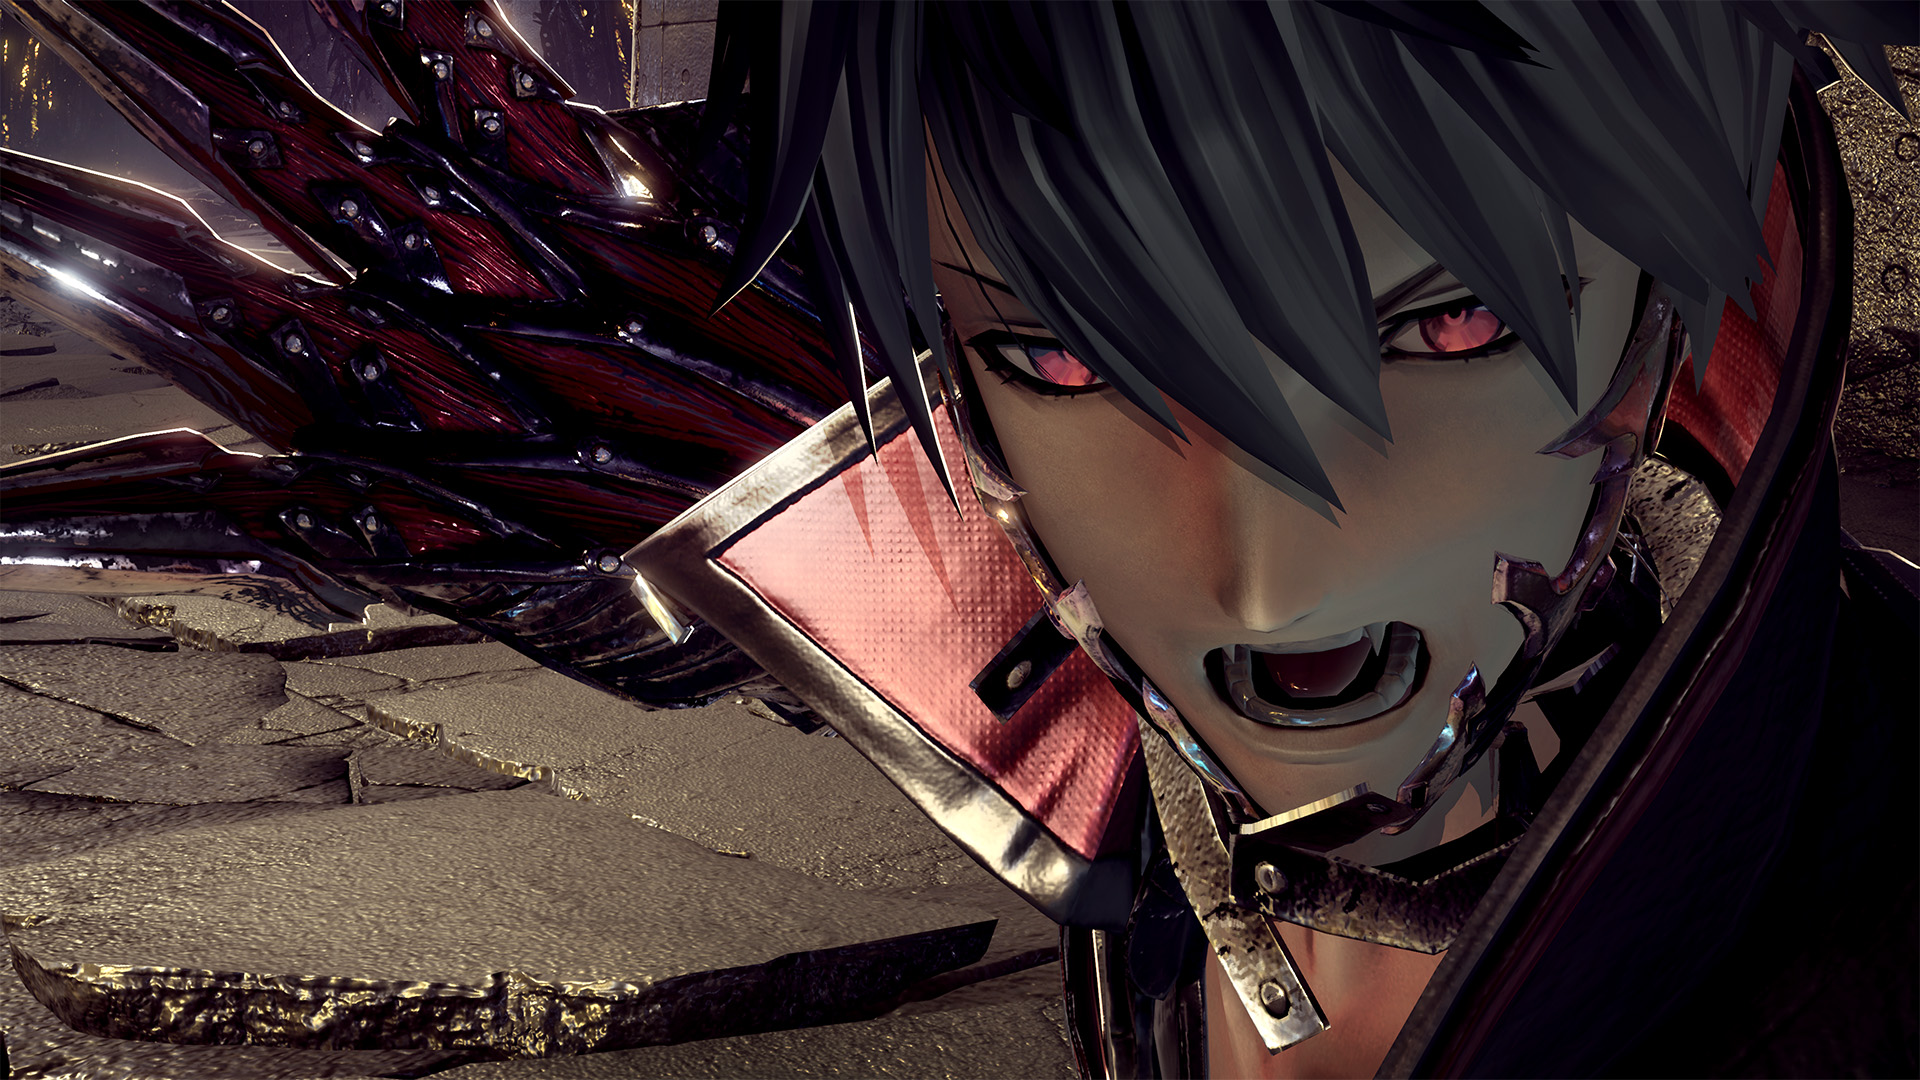 Bandai Namco Announces Code Vein, Which Is Certainly A Video Game